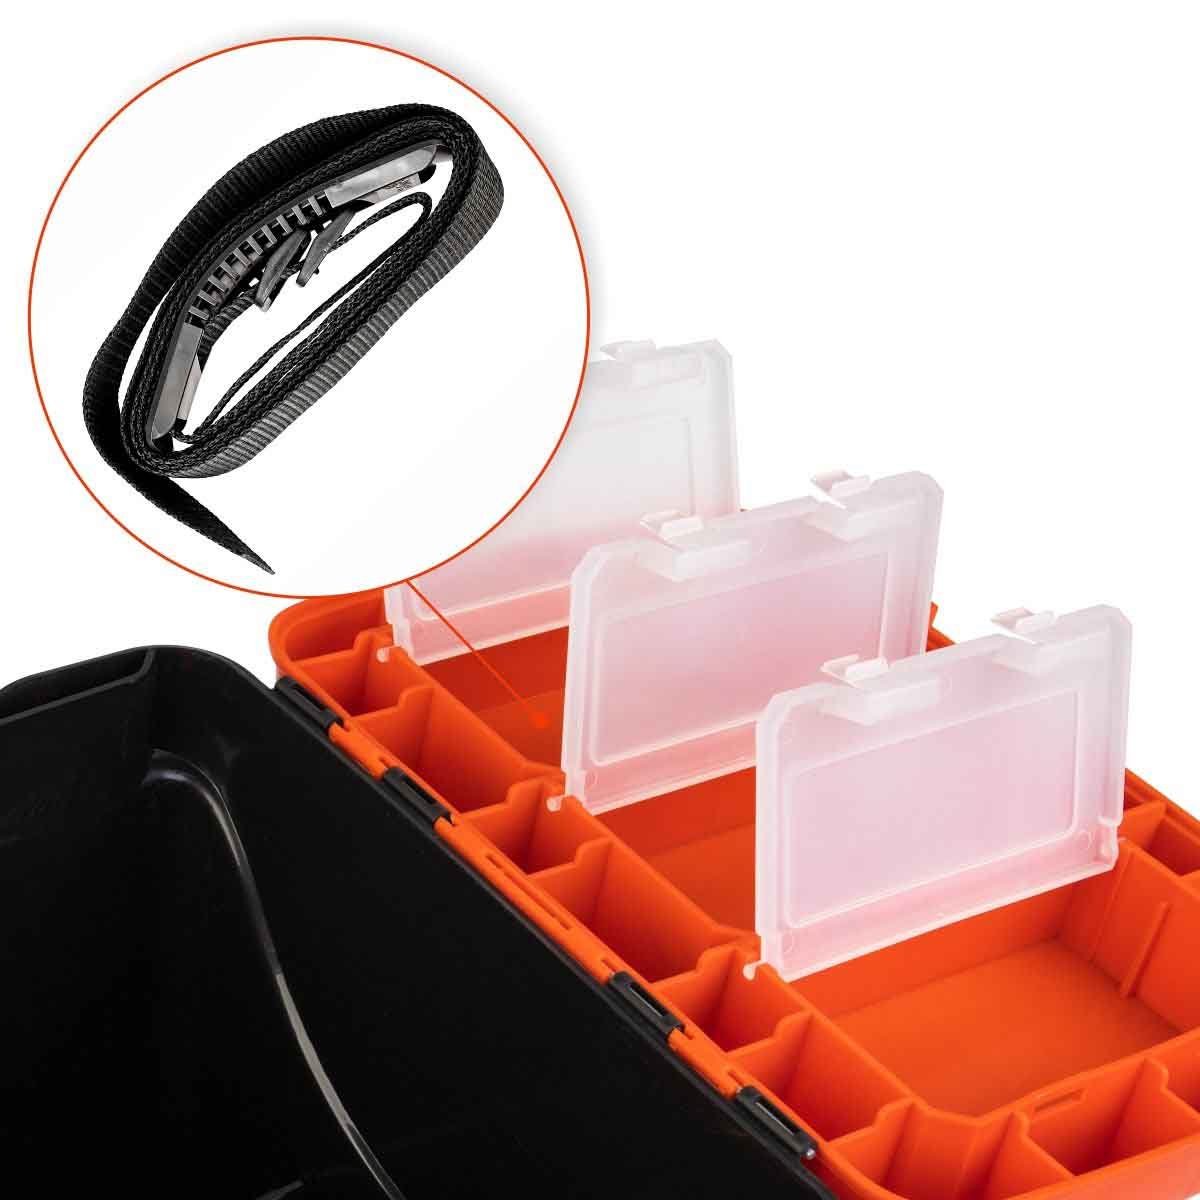 FishBox 10 liter SeatBox for Ice Fishing Tackle and Gear